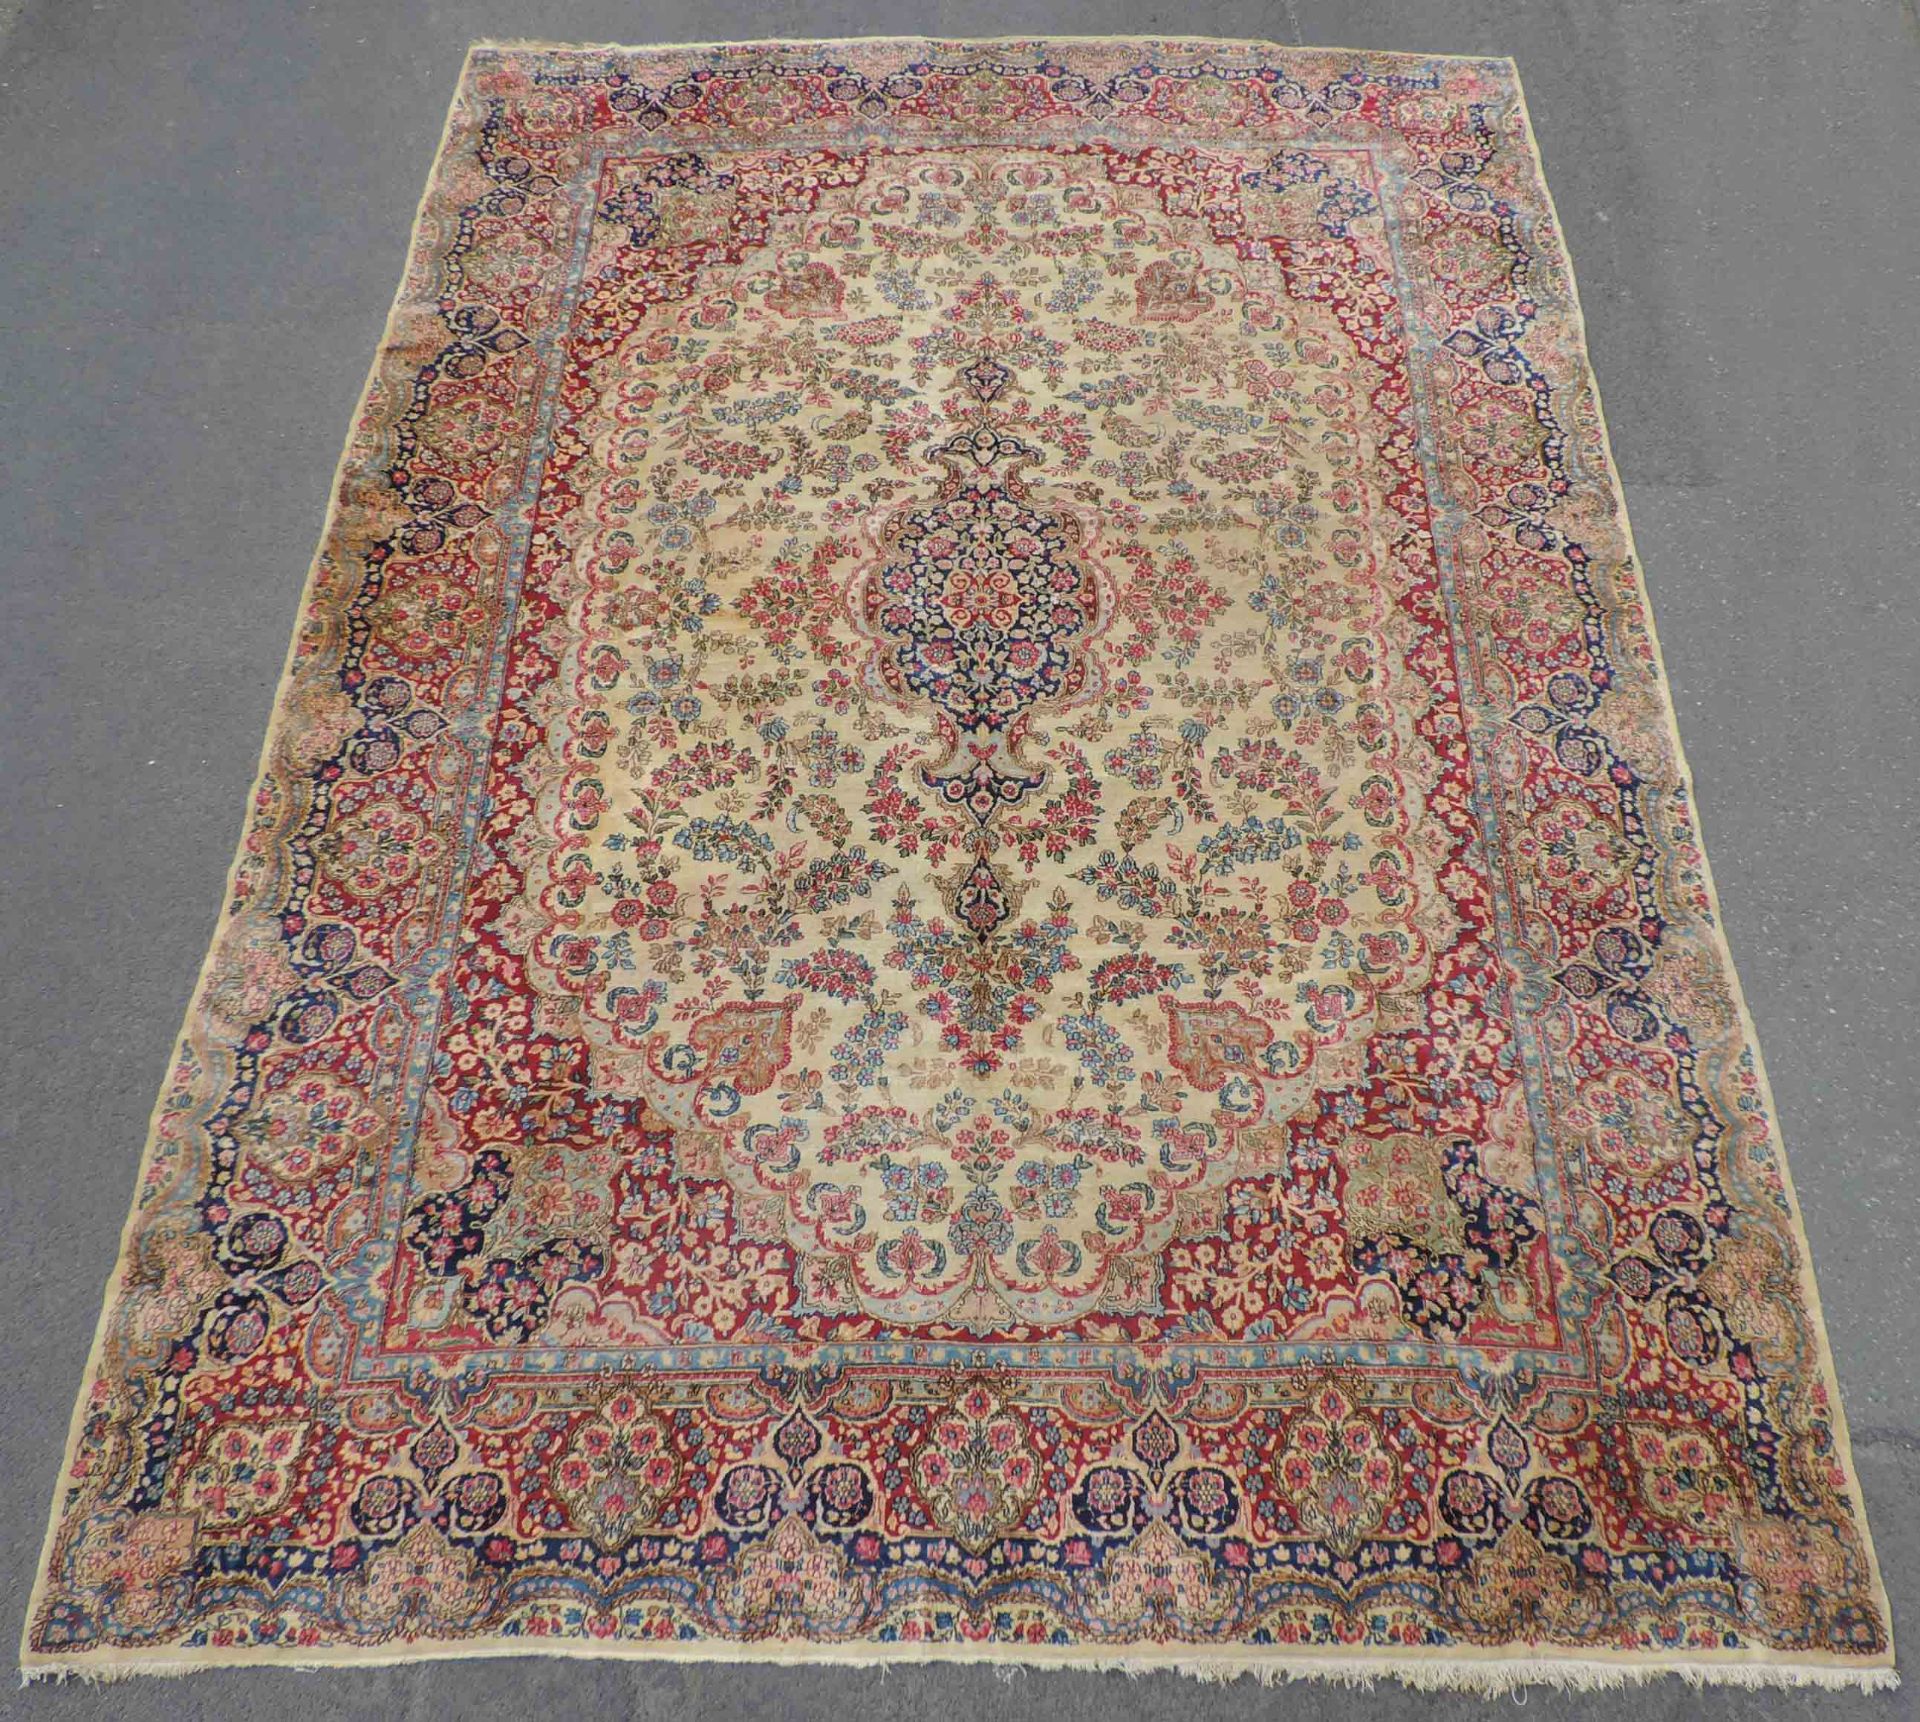 Kirman Persian carpet. Iran. Old, 1st half of the 20th century.420 cm x 297 cm. Knotted by hand.